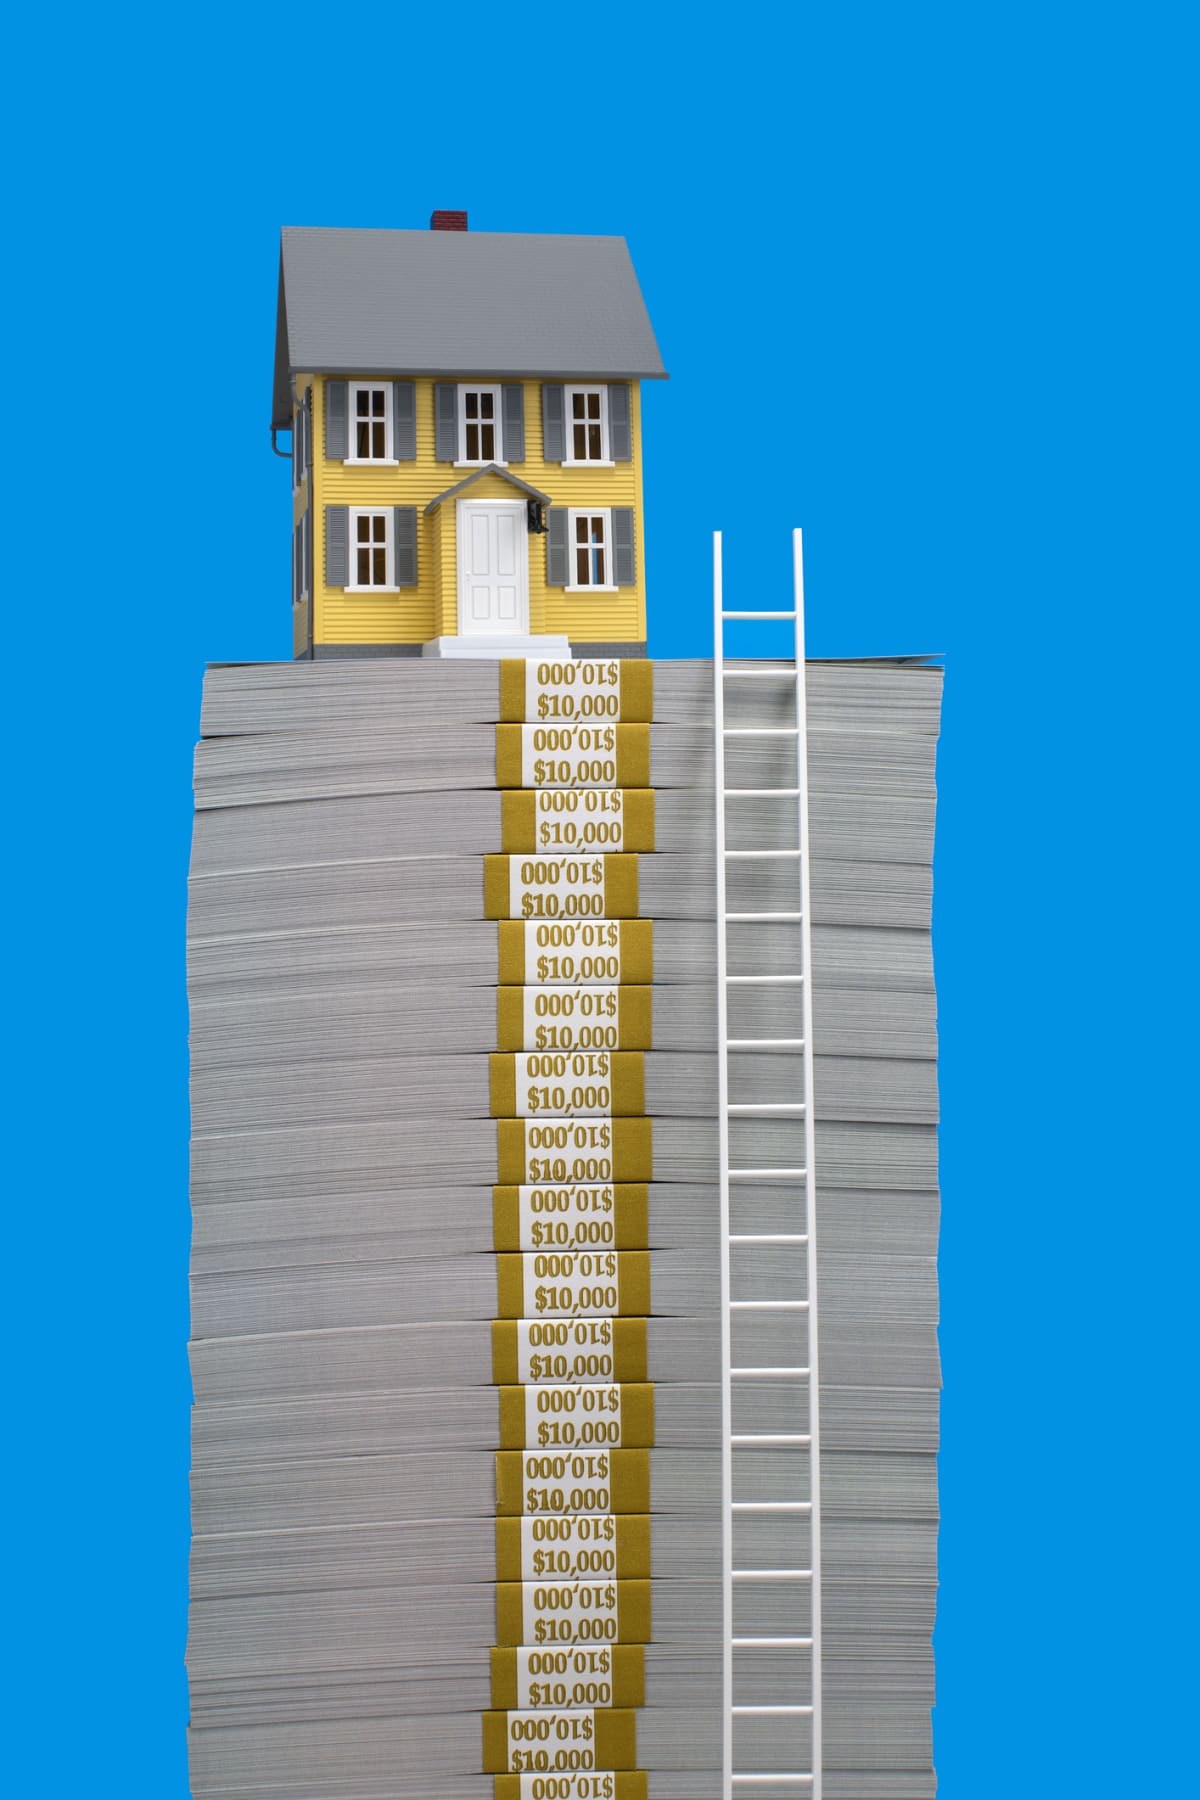 White ladder leading to model of yellow single family home on top of stack of $100 US bill bundles, blue background